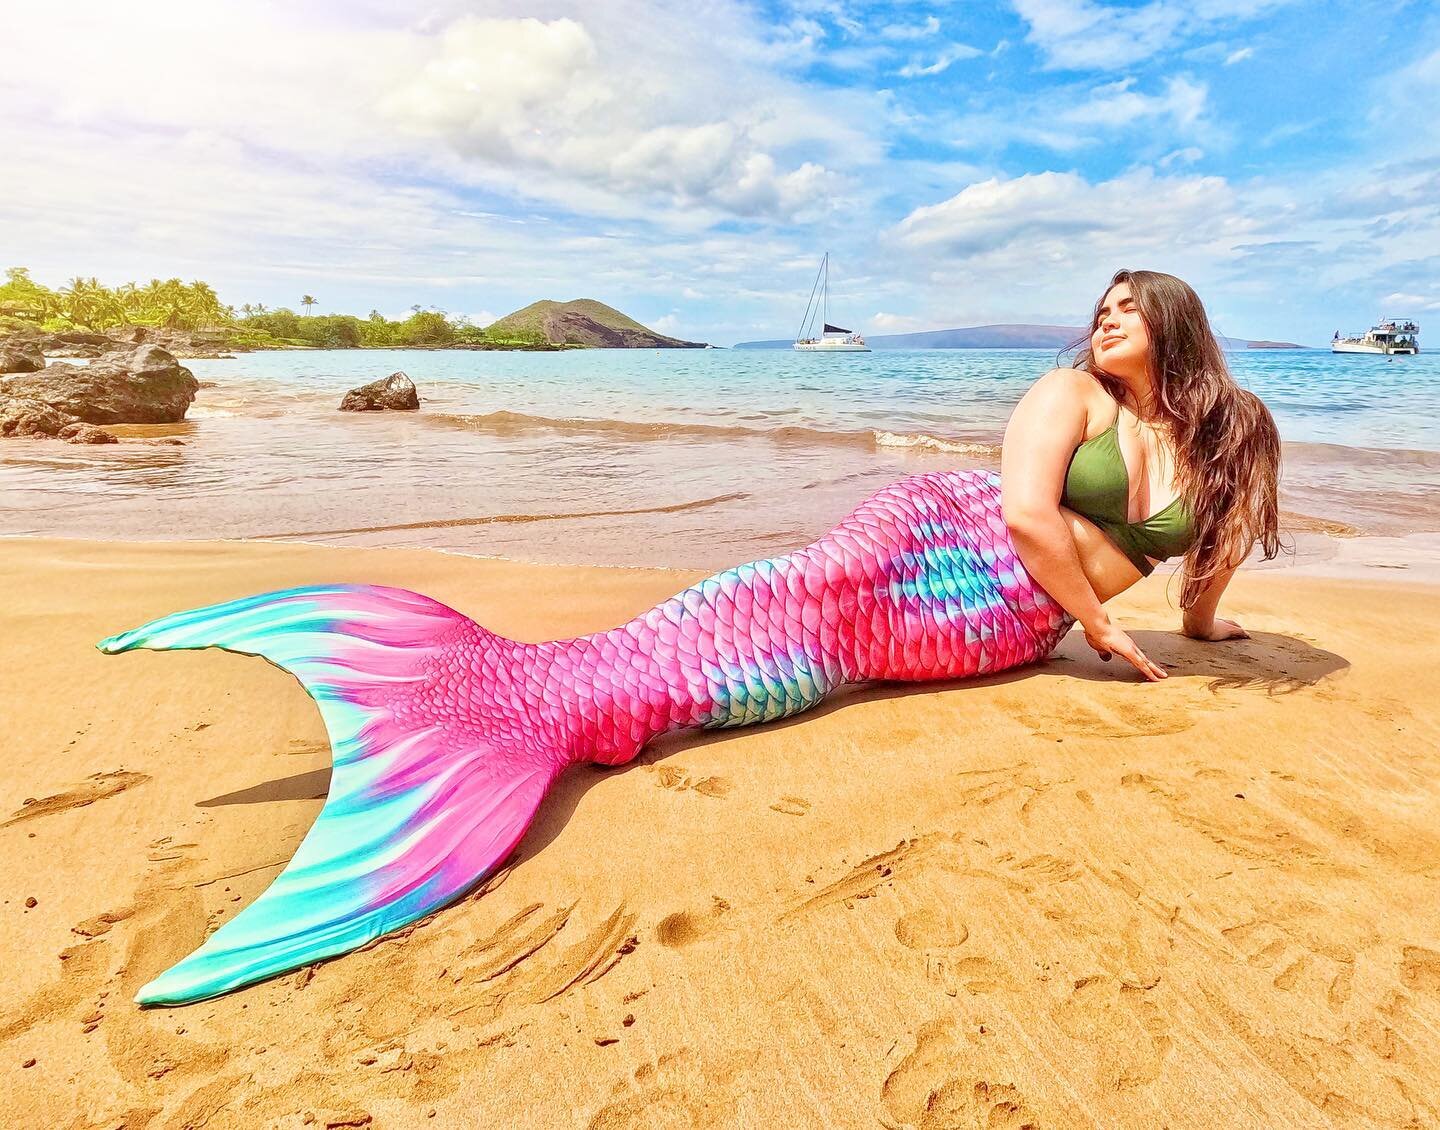 😍 I was absolutely blown away during my swimming lesson with Tara!! It was her first time in a mermaid tail and she looked like a complete professional. I have no doubt she was born to be a mermaid!!

#maui #mauihawaii #hawaii #mauiactivities #mauit